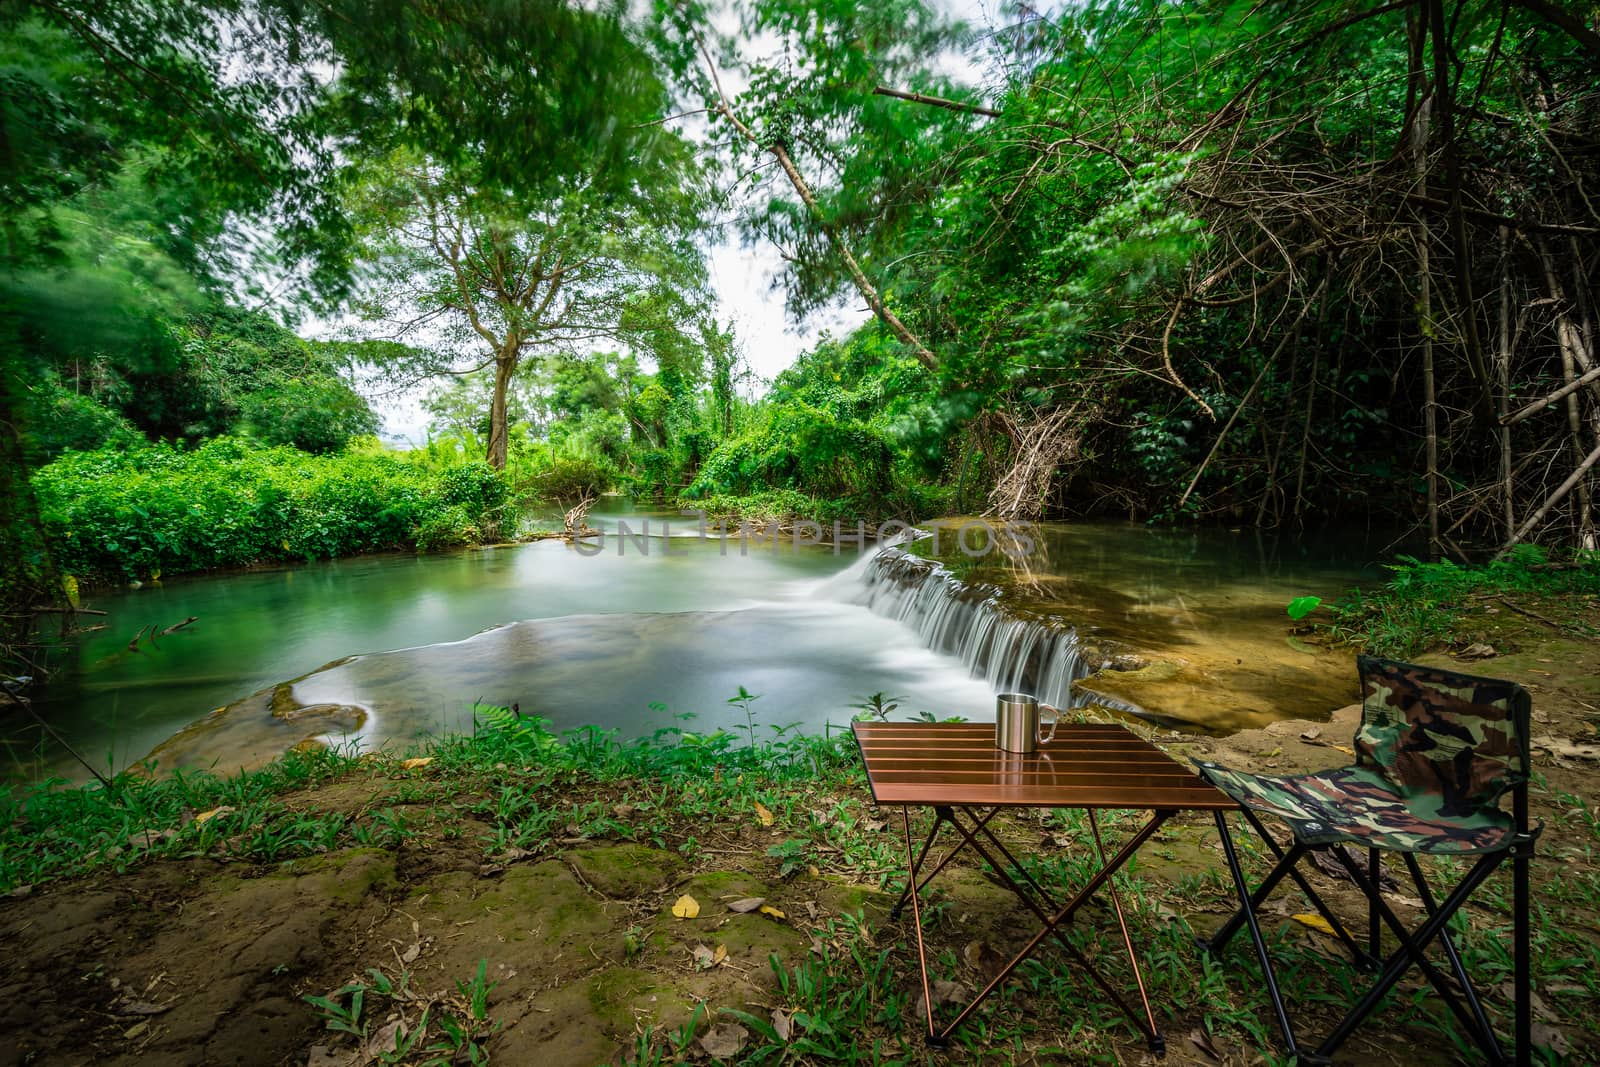 Camping chair with table in front of the waterfall on holiday